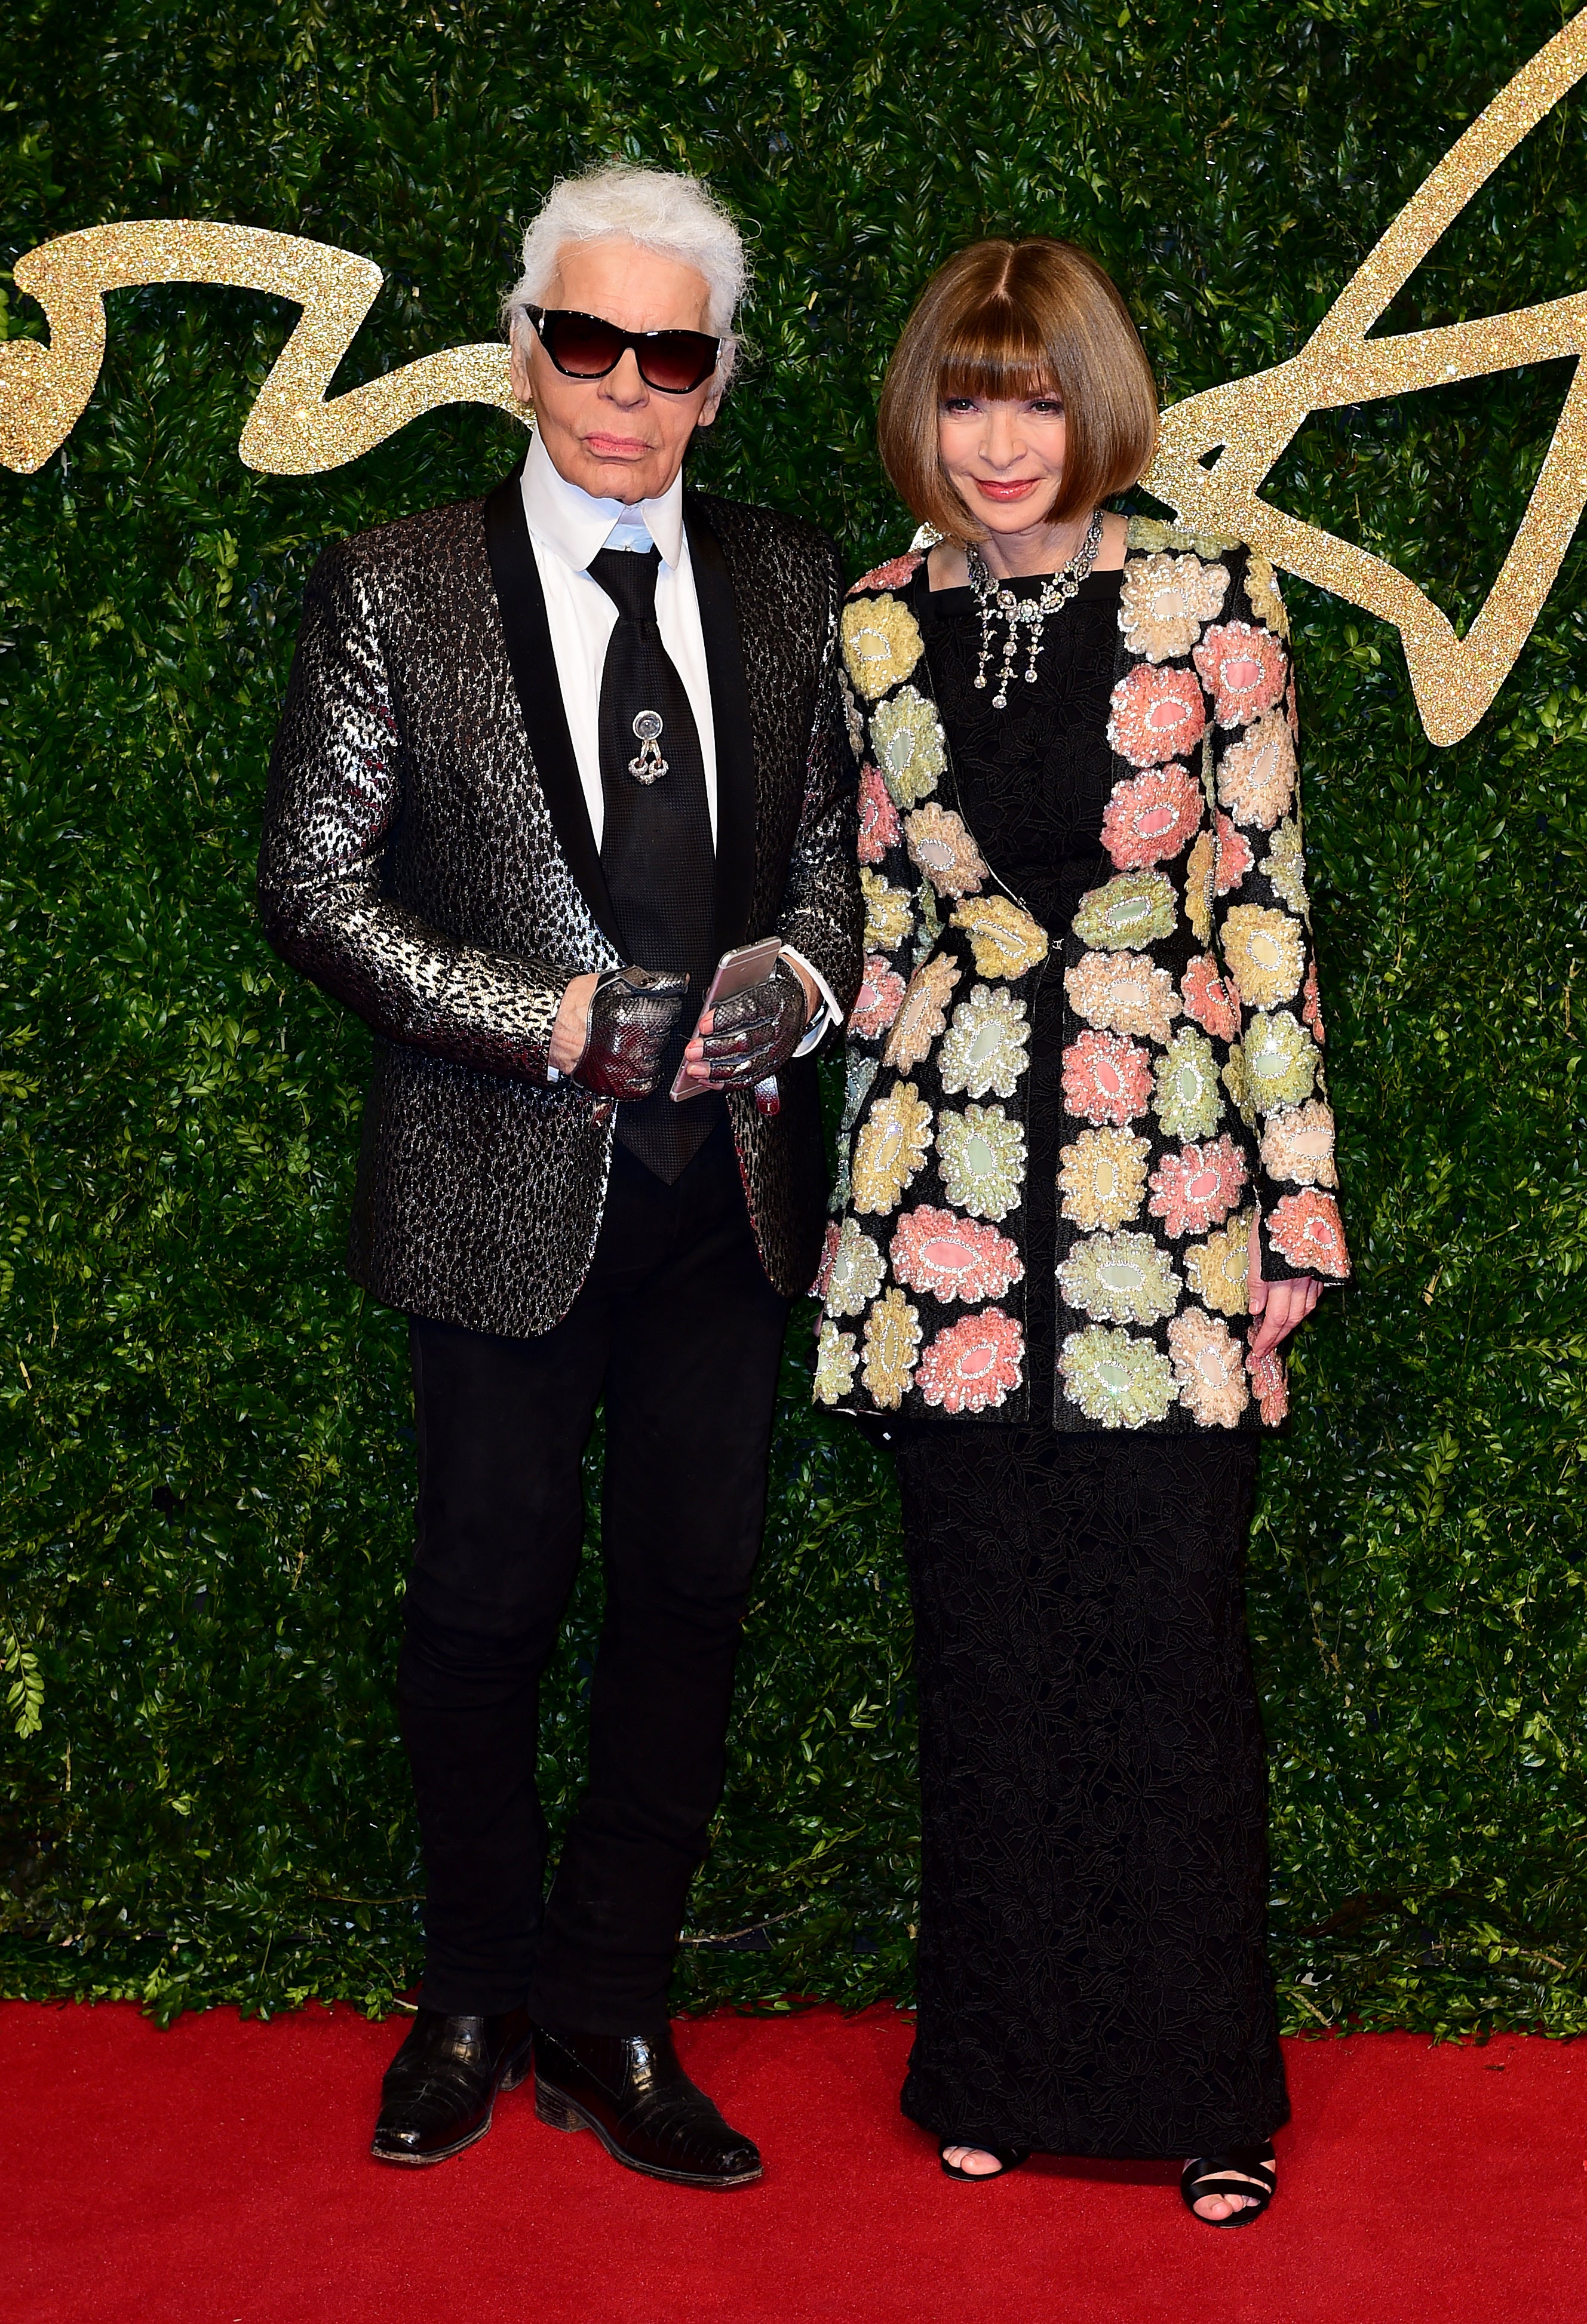 Karl Lagerfeld and Anna Wintour attending the British Fashion Awards (Ian West/PA)